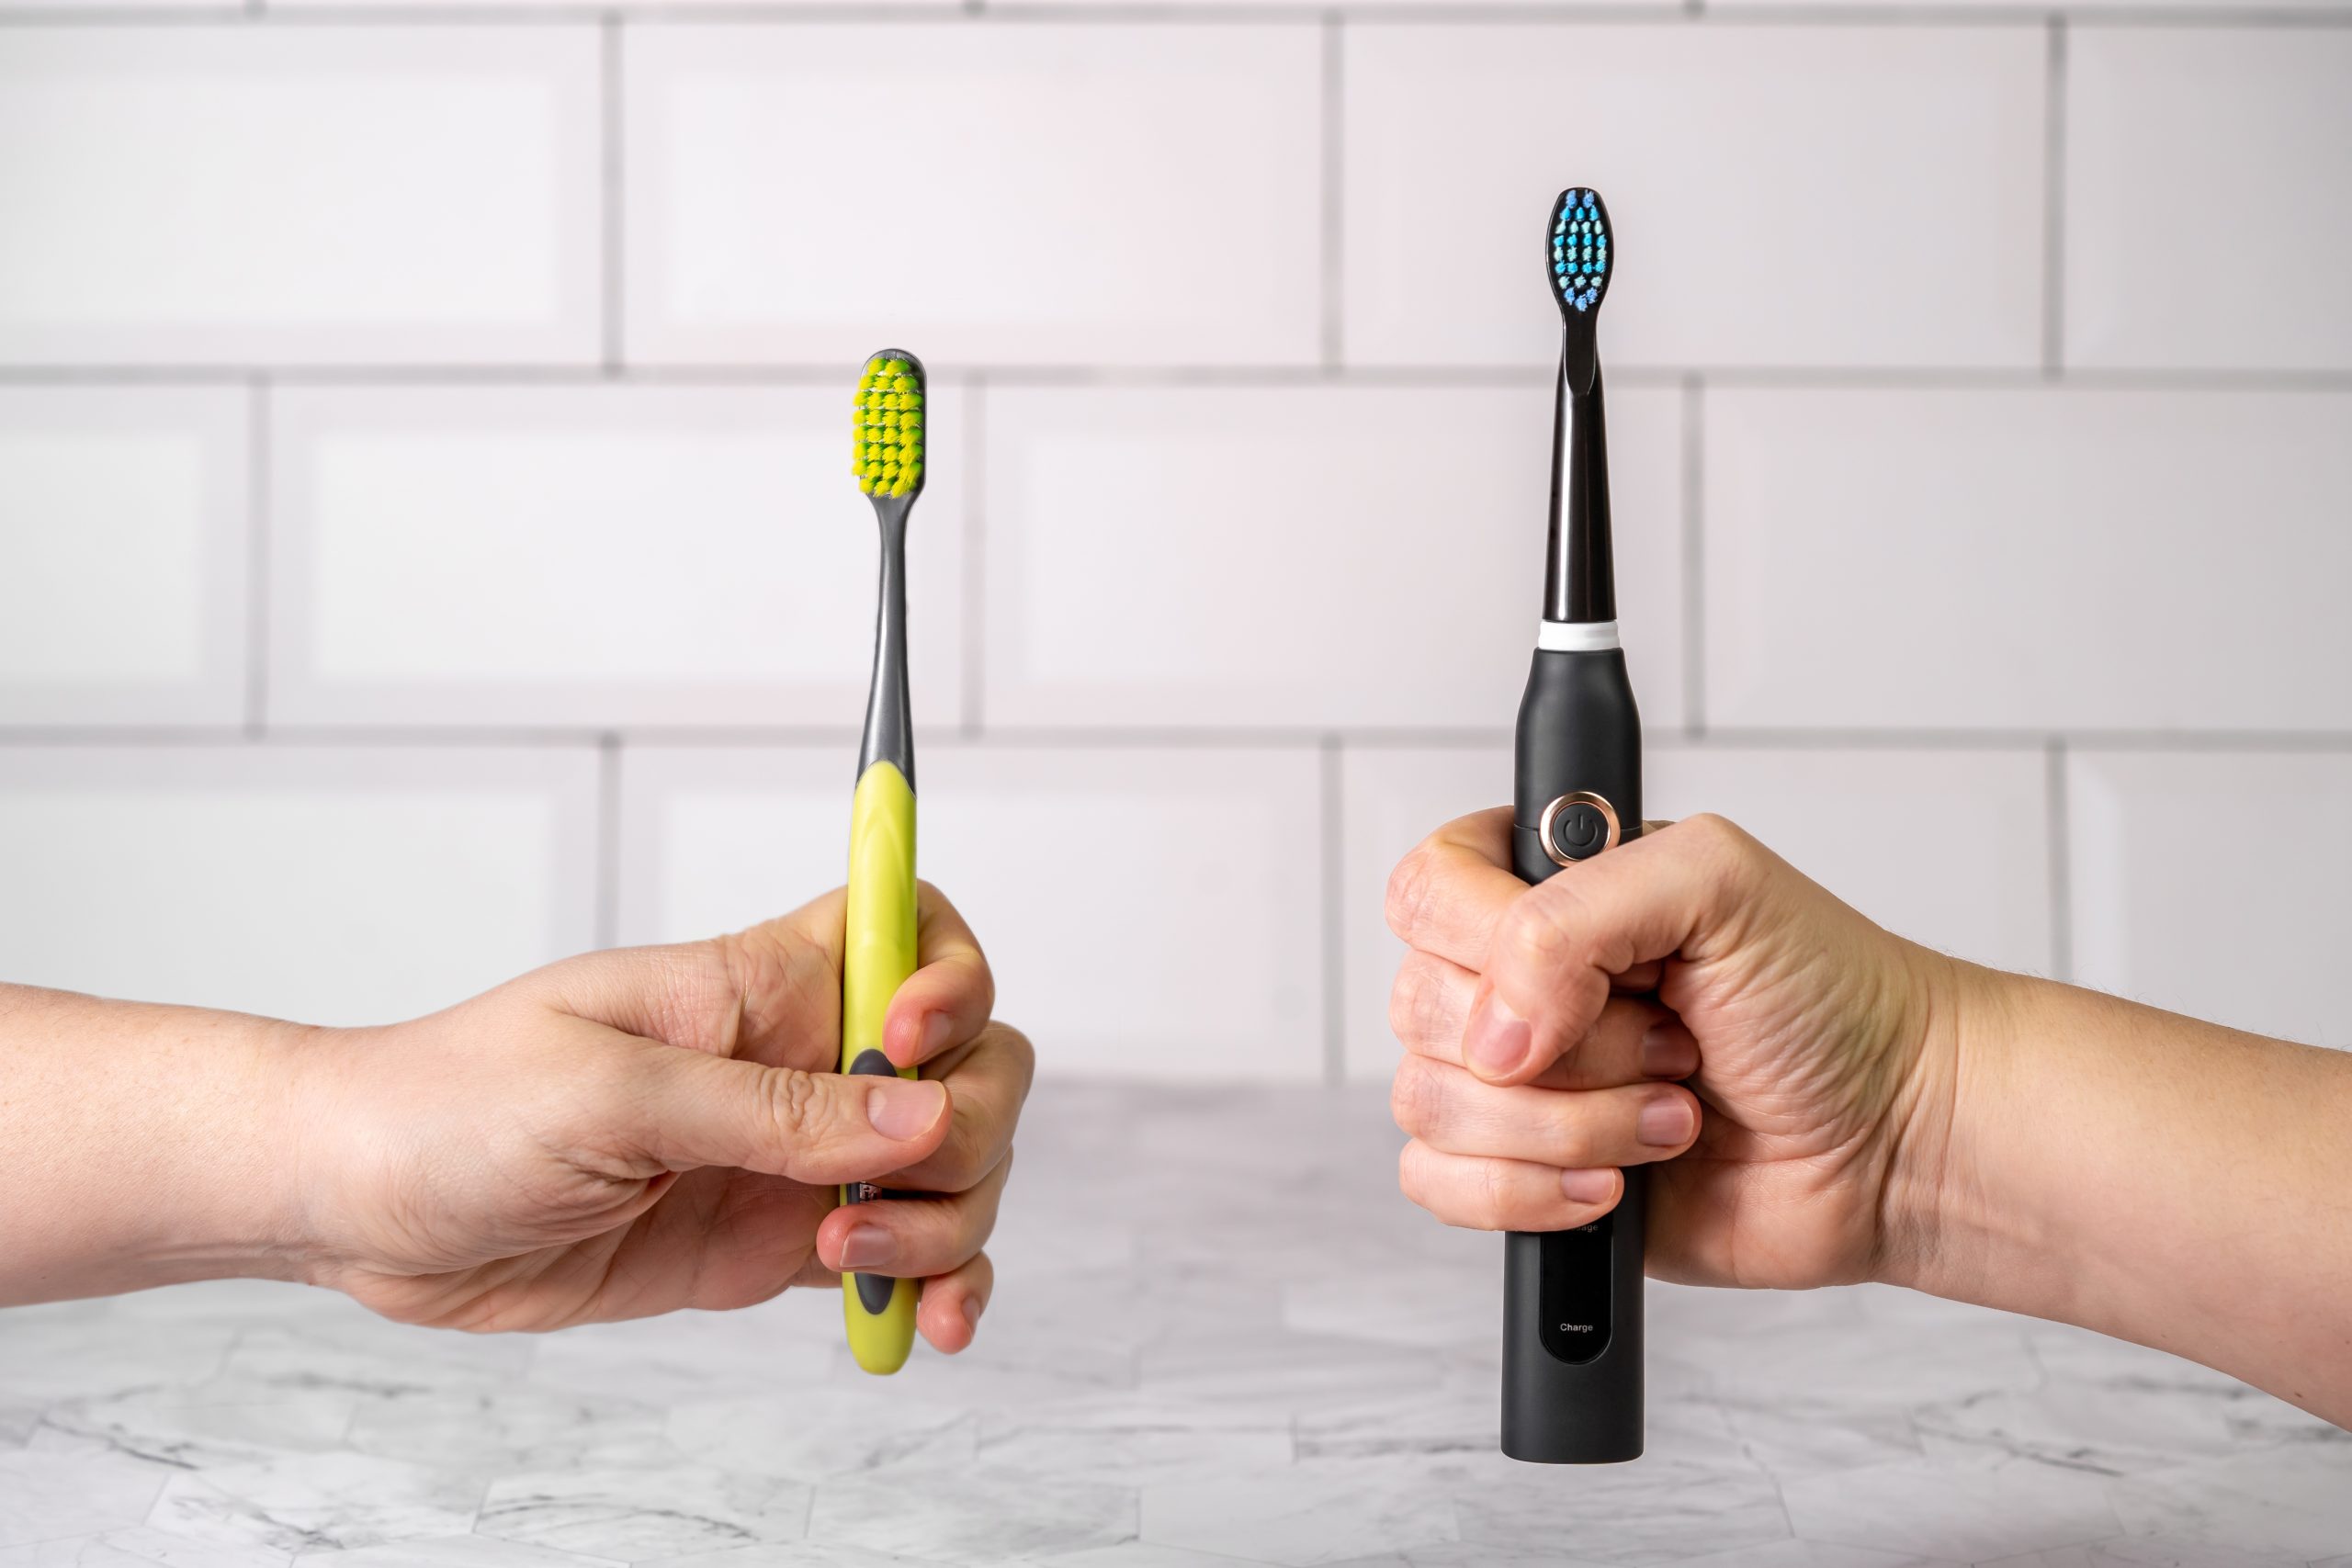 Manual Vs Electric – Find the Right Toothbrush